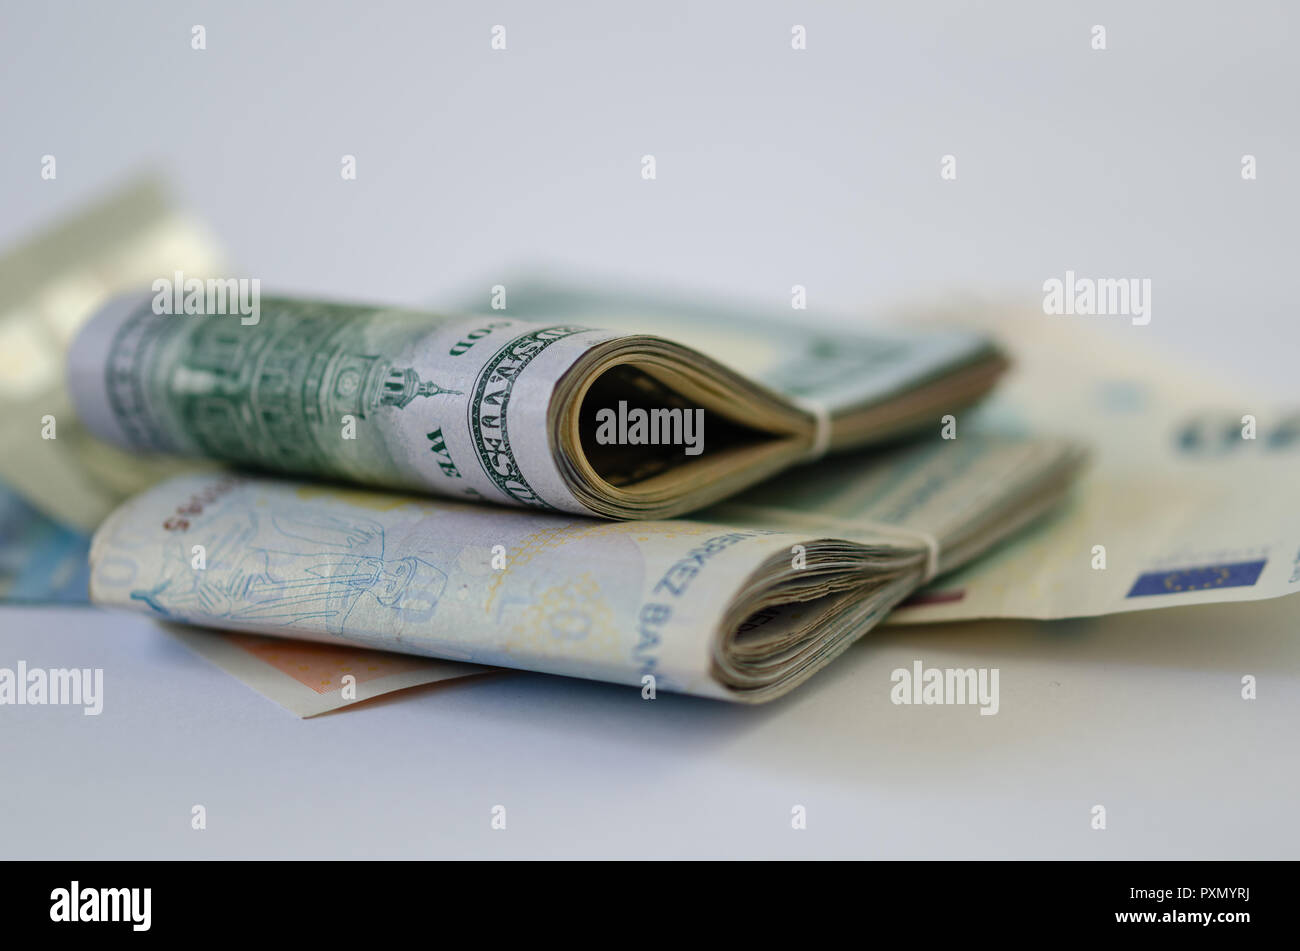 There are dolar,euro and liras banknotes on the white background. Saving money concept. Stock Photo